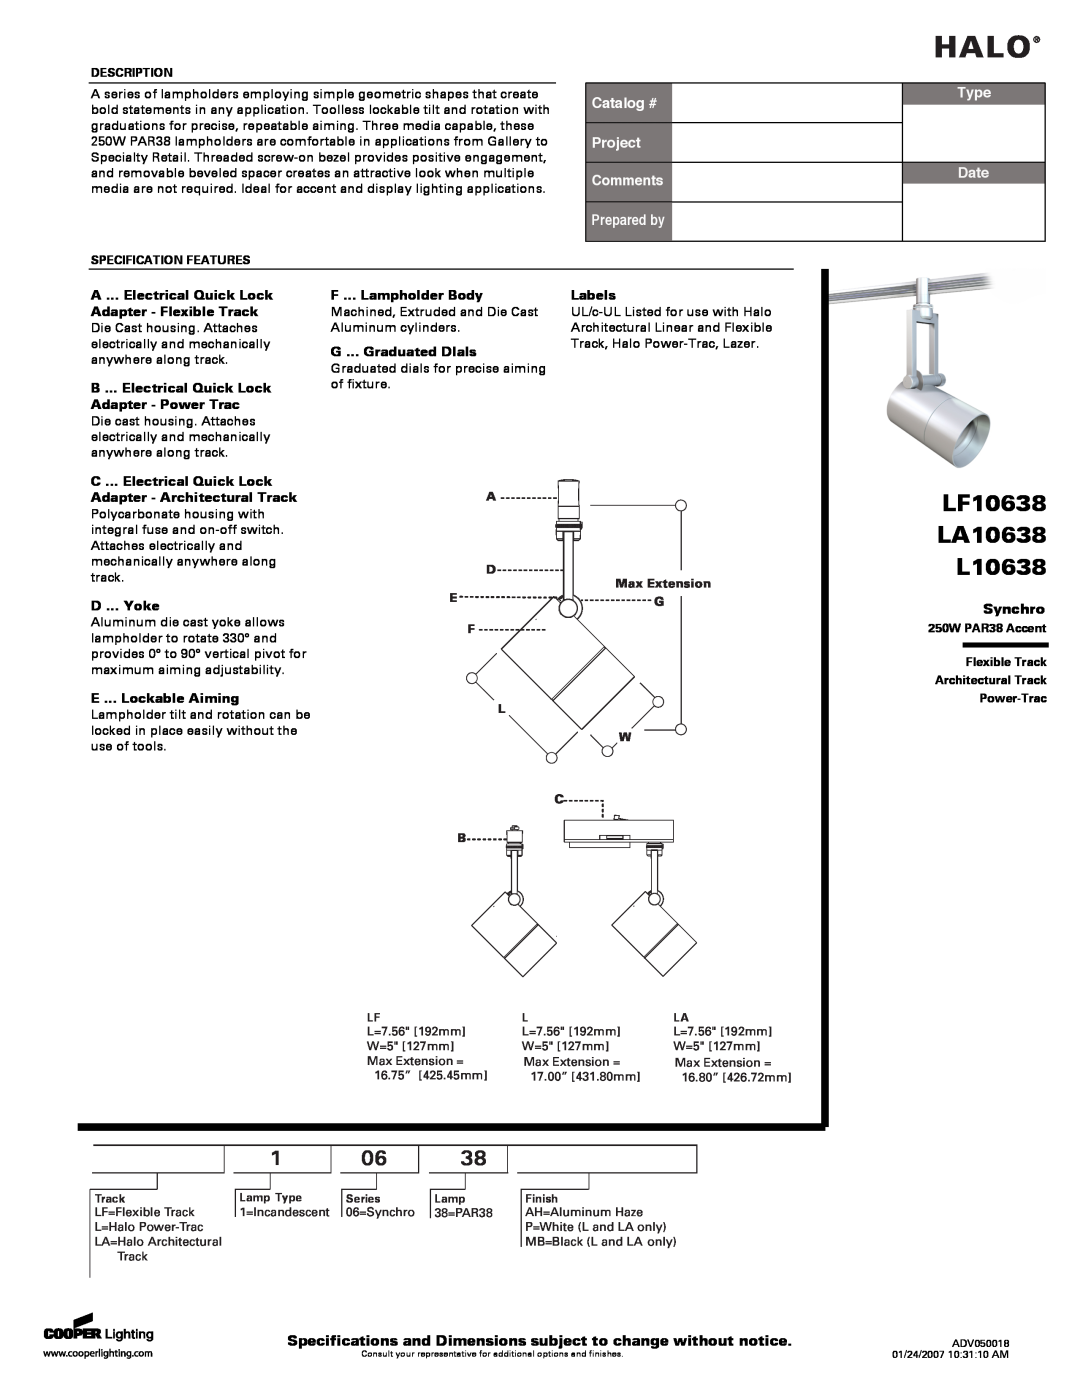 Cooper Lighting specifications Halo, LF10638 LA10638 L10638, Catalog #, Project Comments, Prepared by, Type, Date 